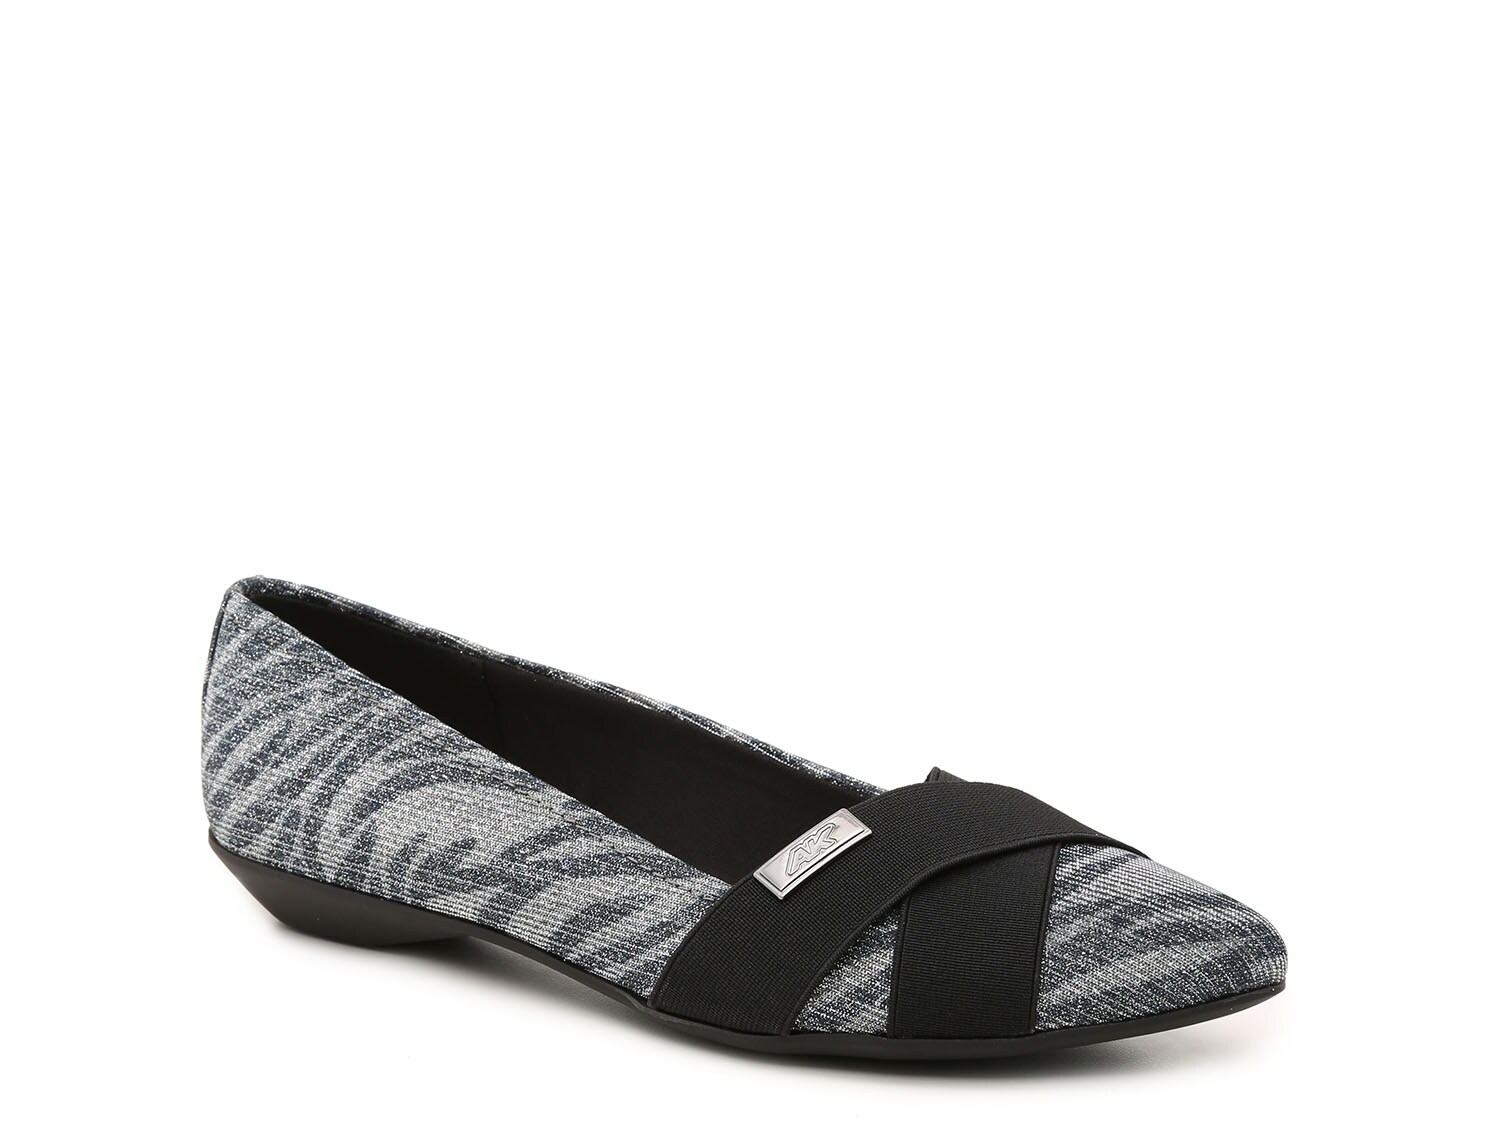 grey pointed flat shoes